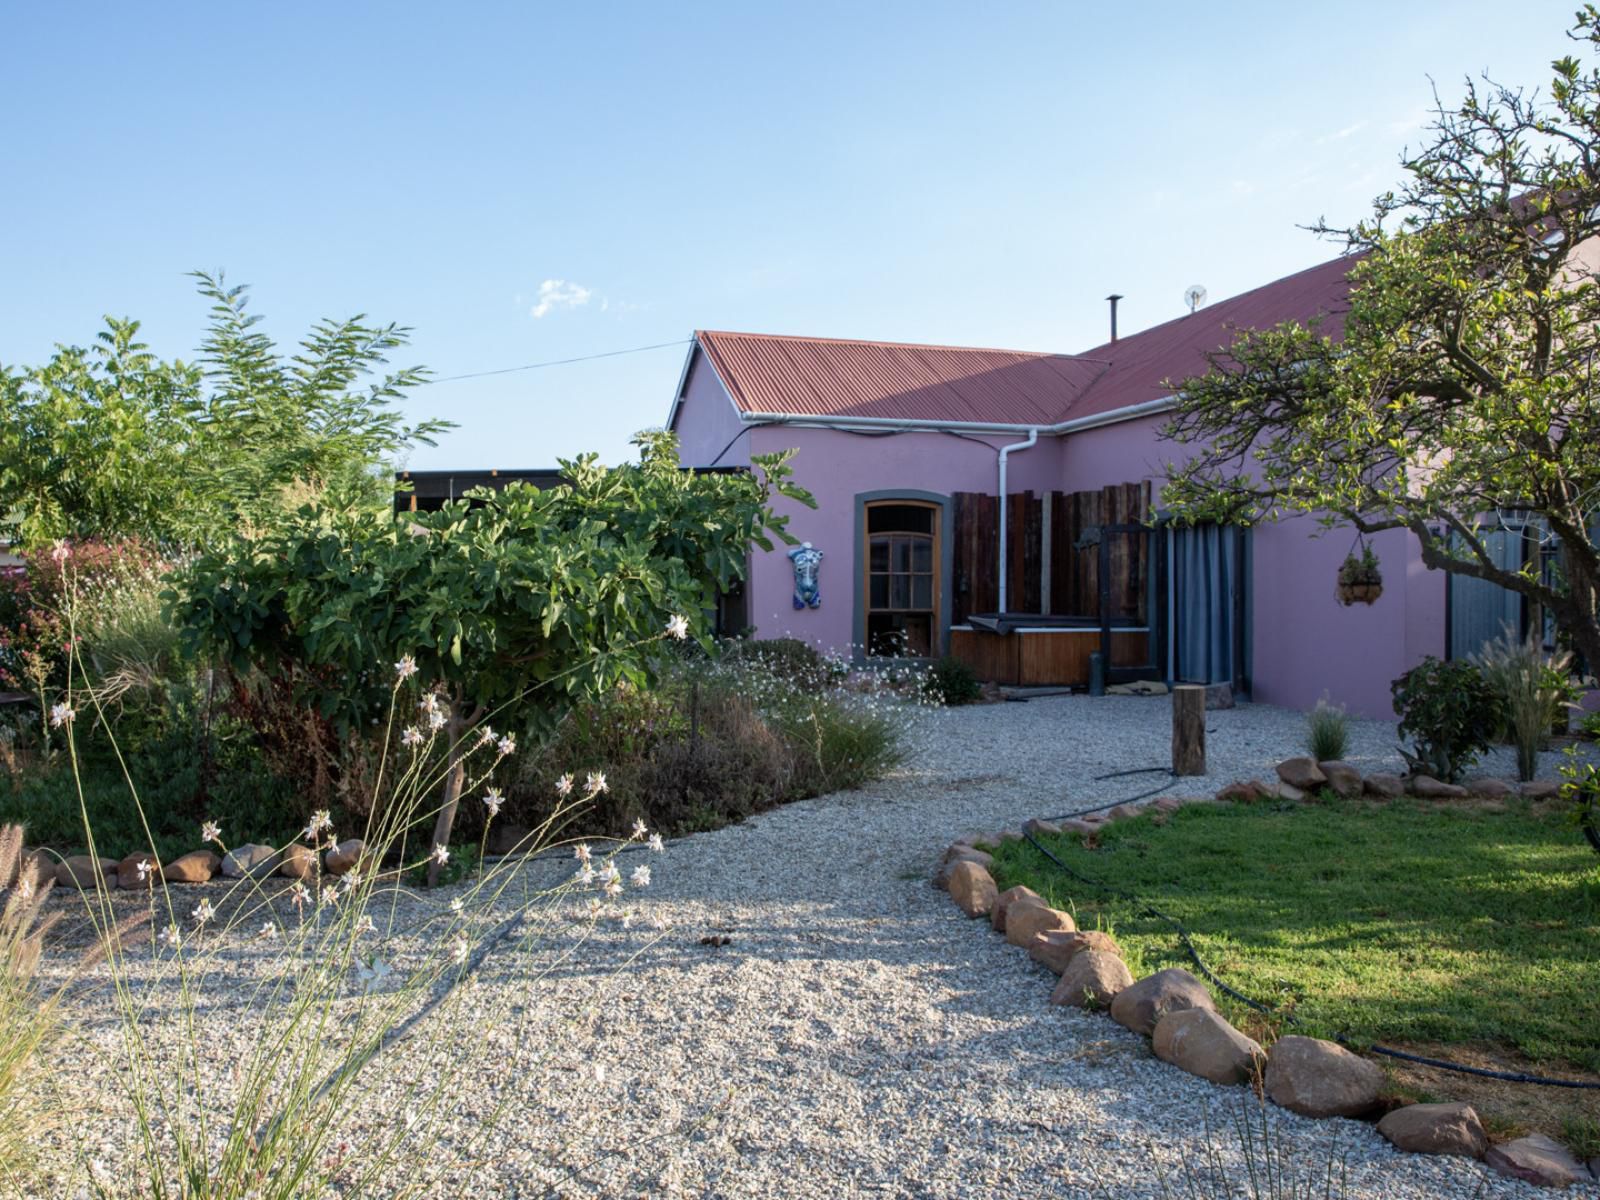 Ebonymoon Guest House And Studio Porterville Western Cape South Africa House, Building, Architecture